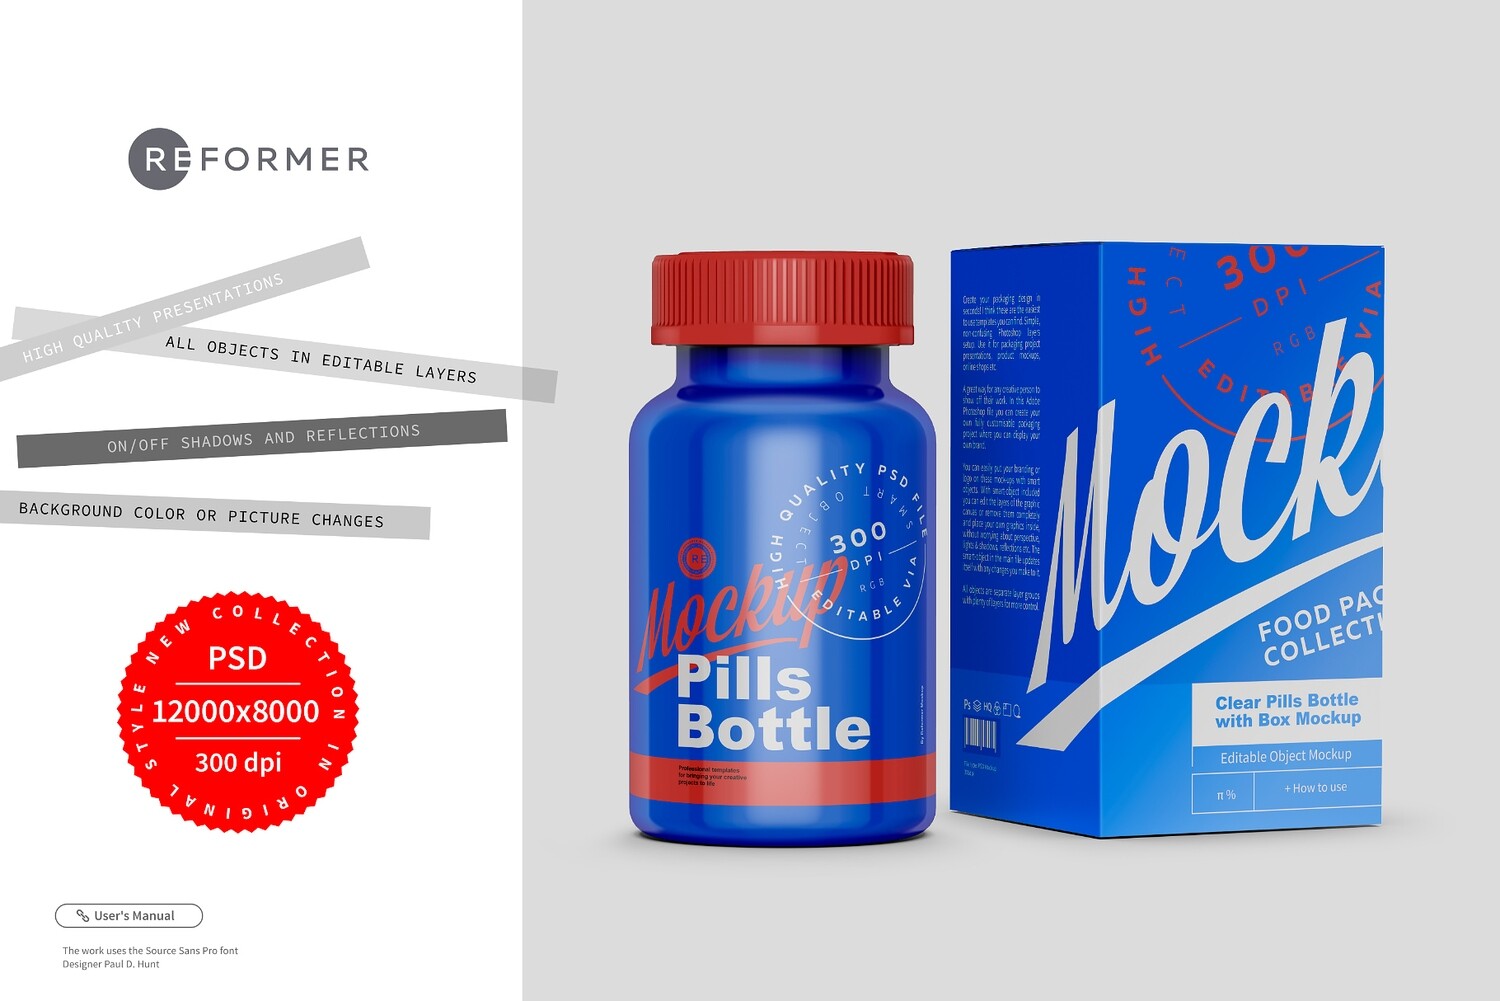 Colored Pills Bottle with Box Mockup